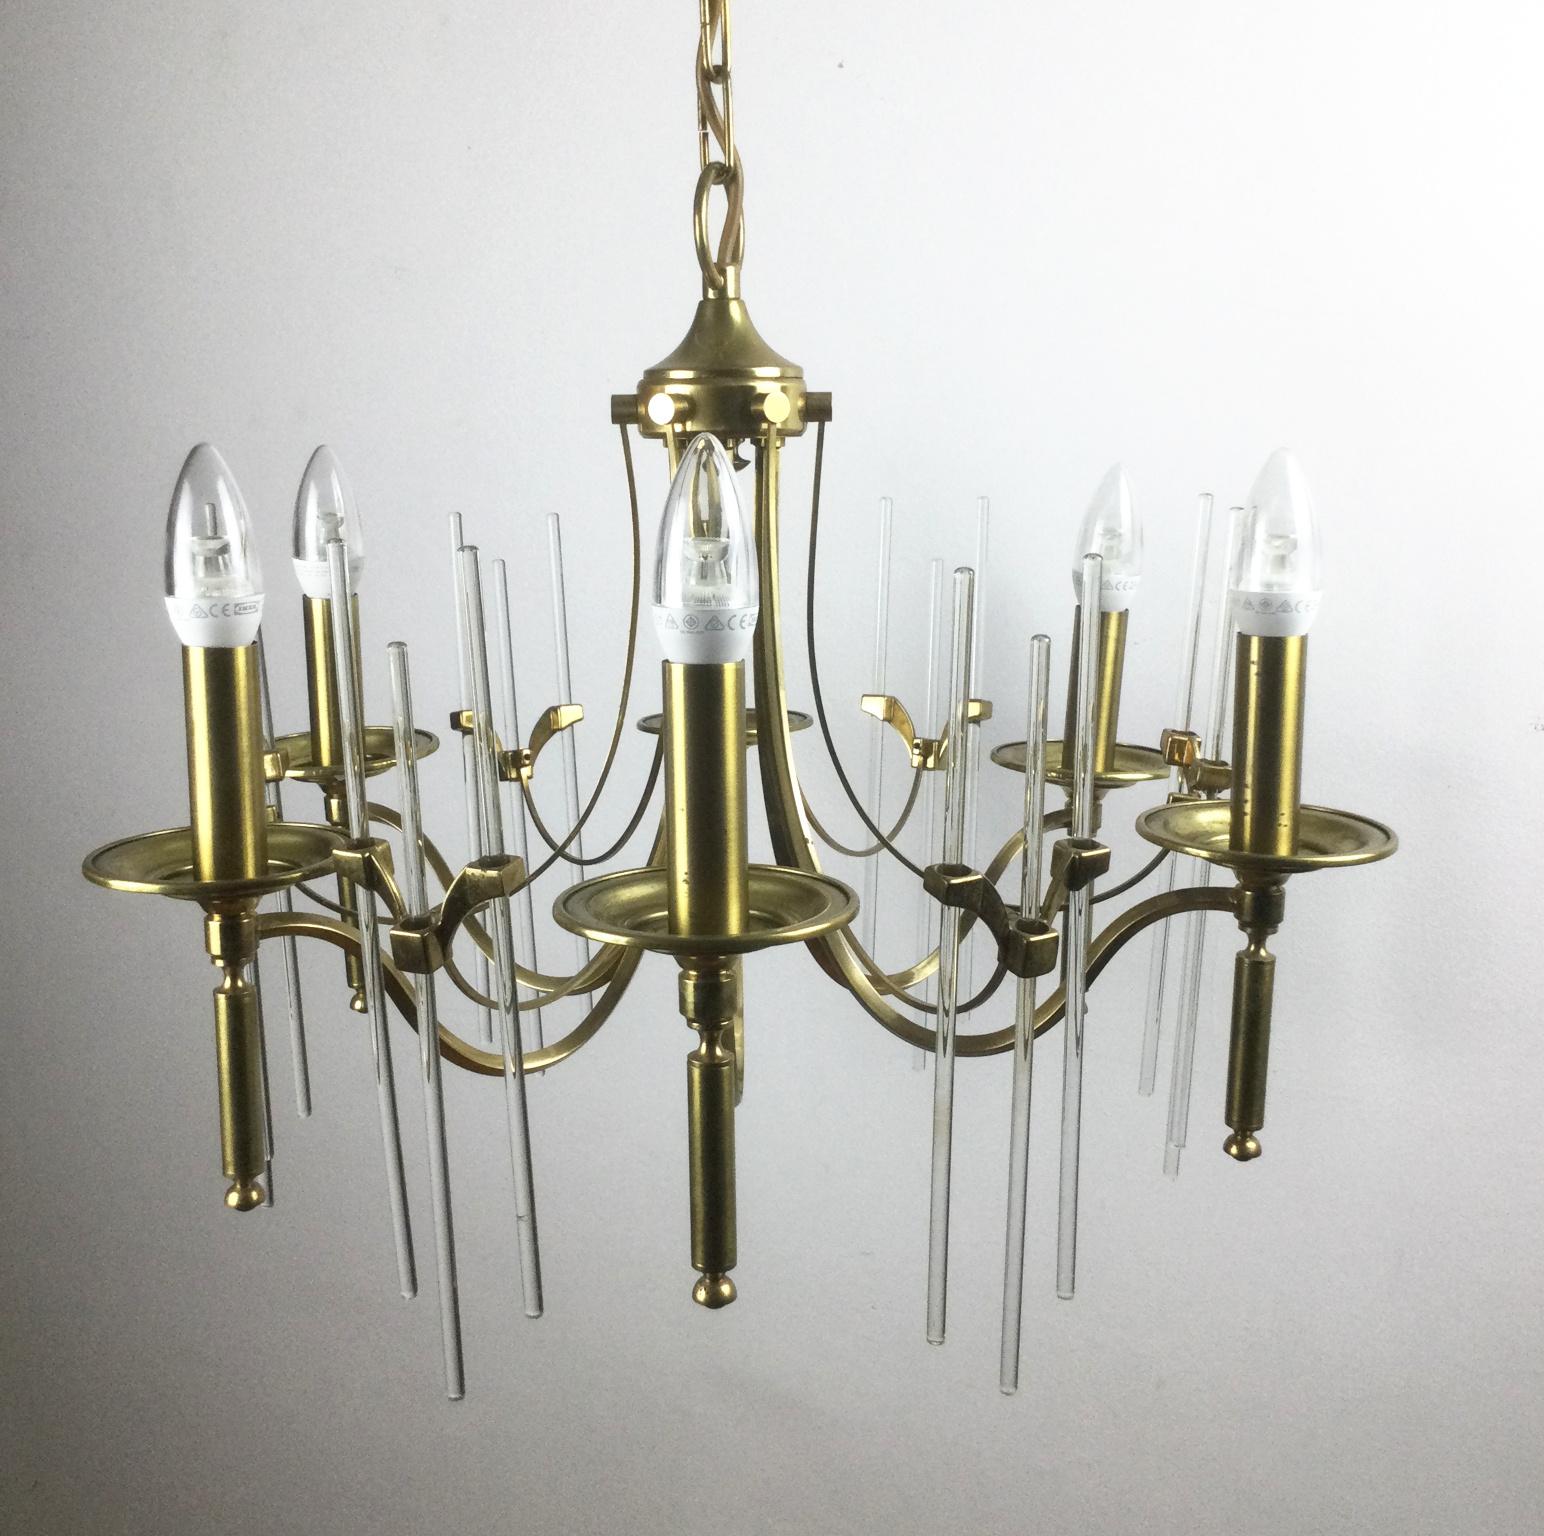 Italian midcentury Sciolari chandelier is made of polished brass and clear glass sticks.